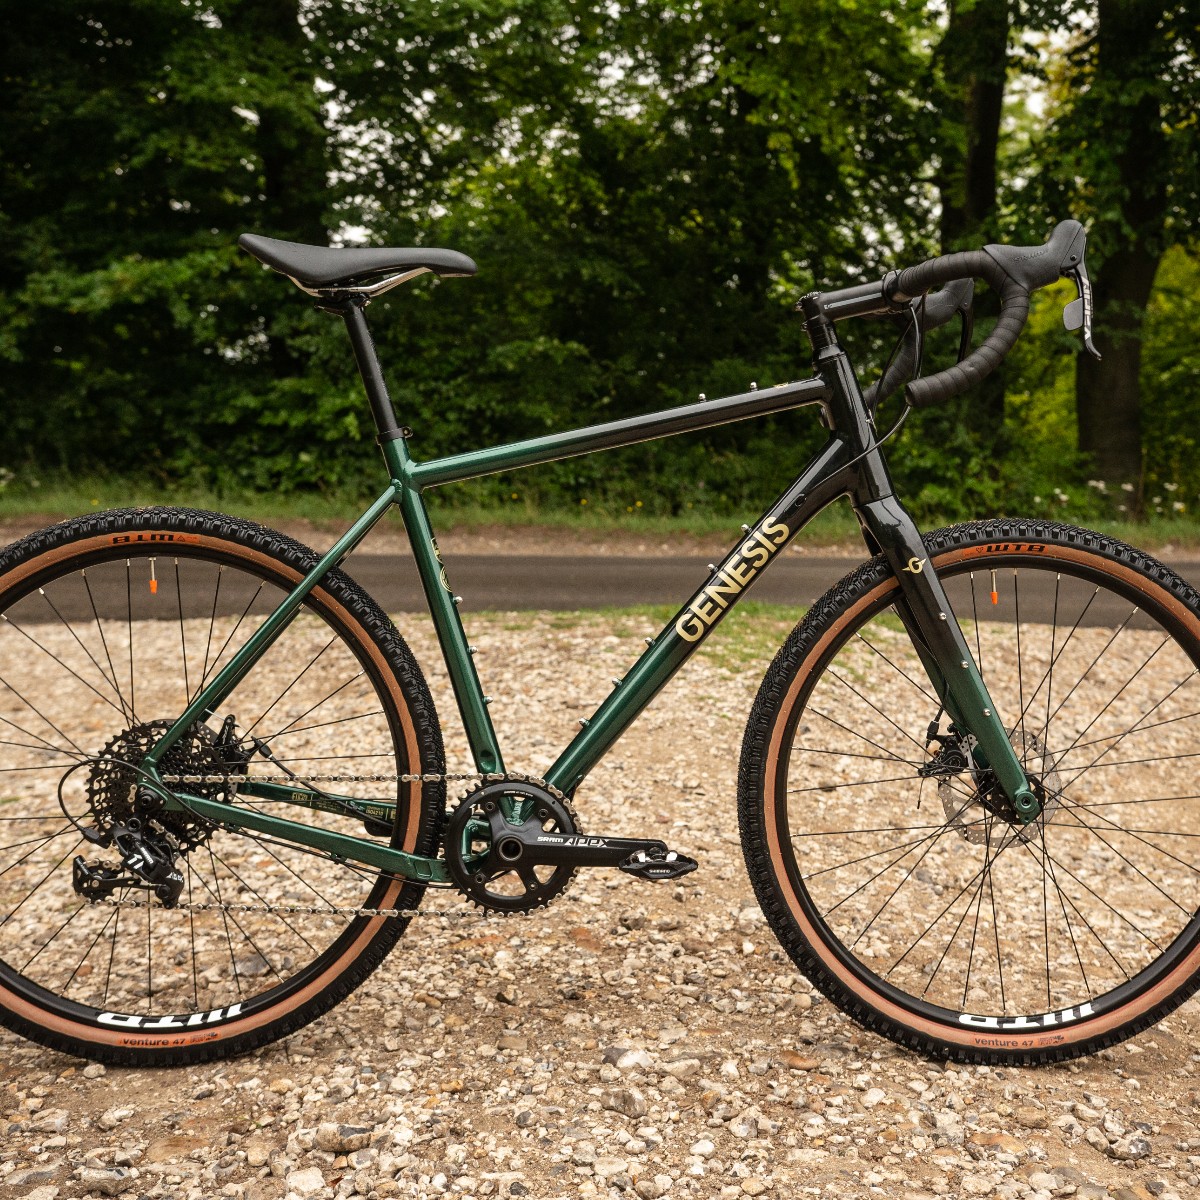 Genesis on "Our entry-level Gravel bike still has all the important to you, at the heart of the Fugio 10 is it's aluminium frameset and a full carbon